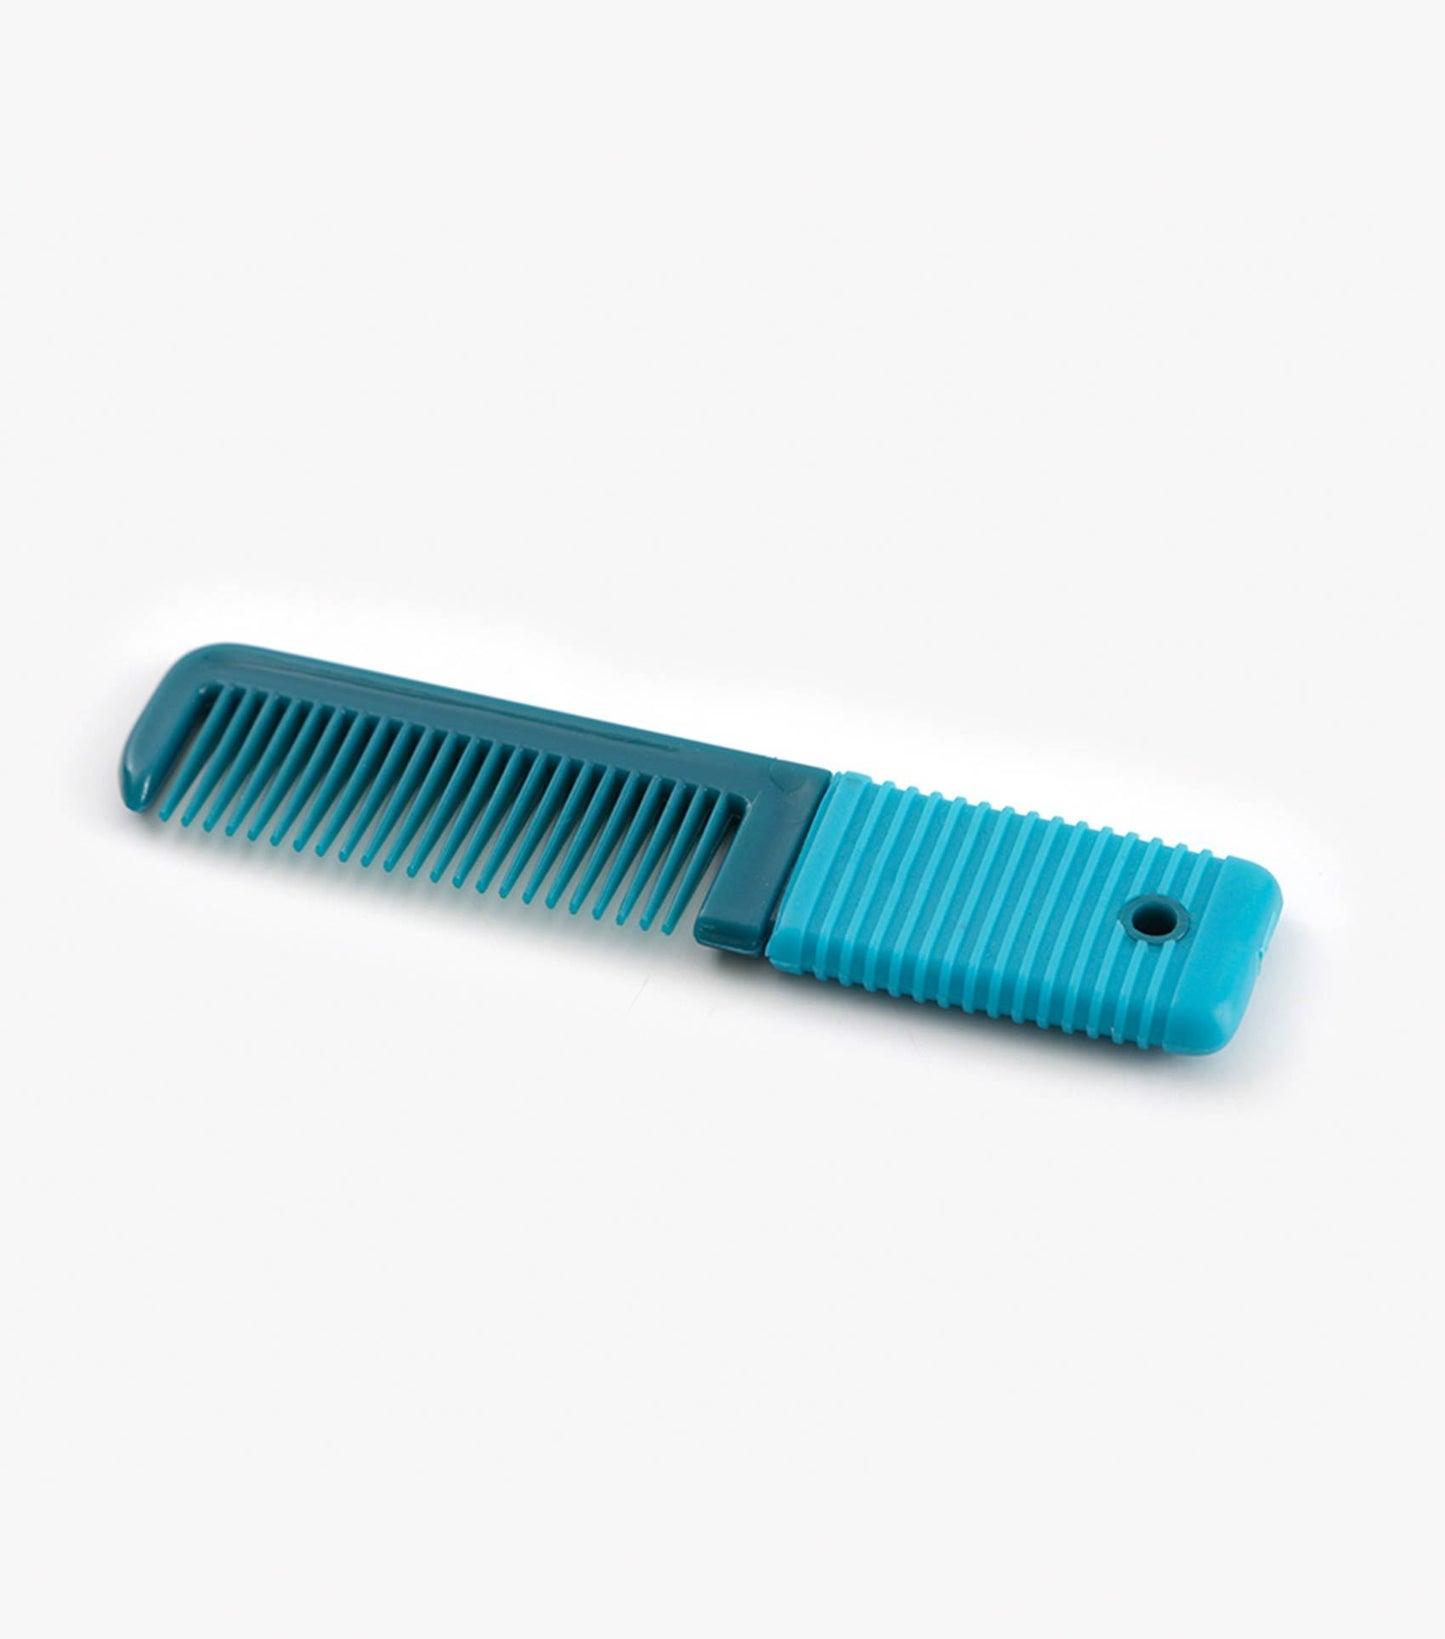 Premier Equine Plastic Mane Comb with Handle - Small